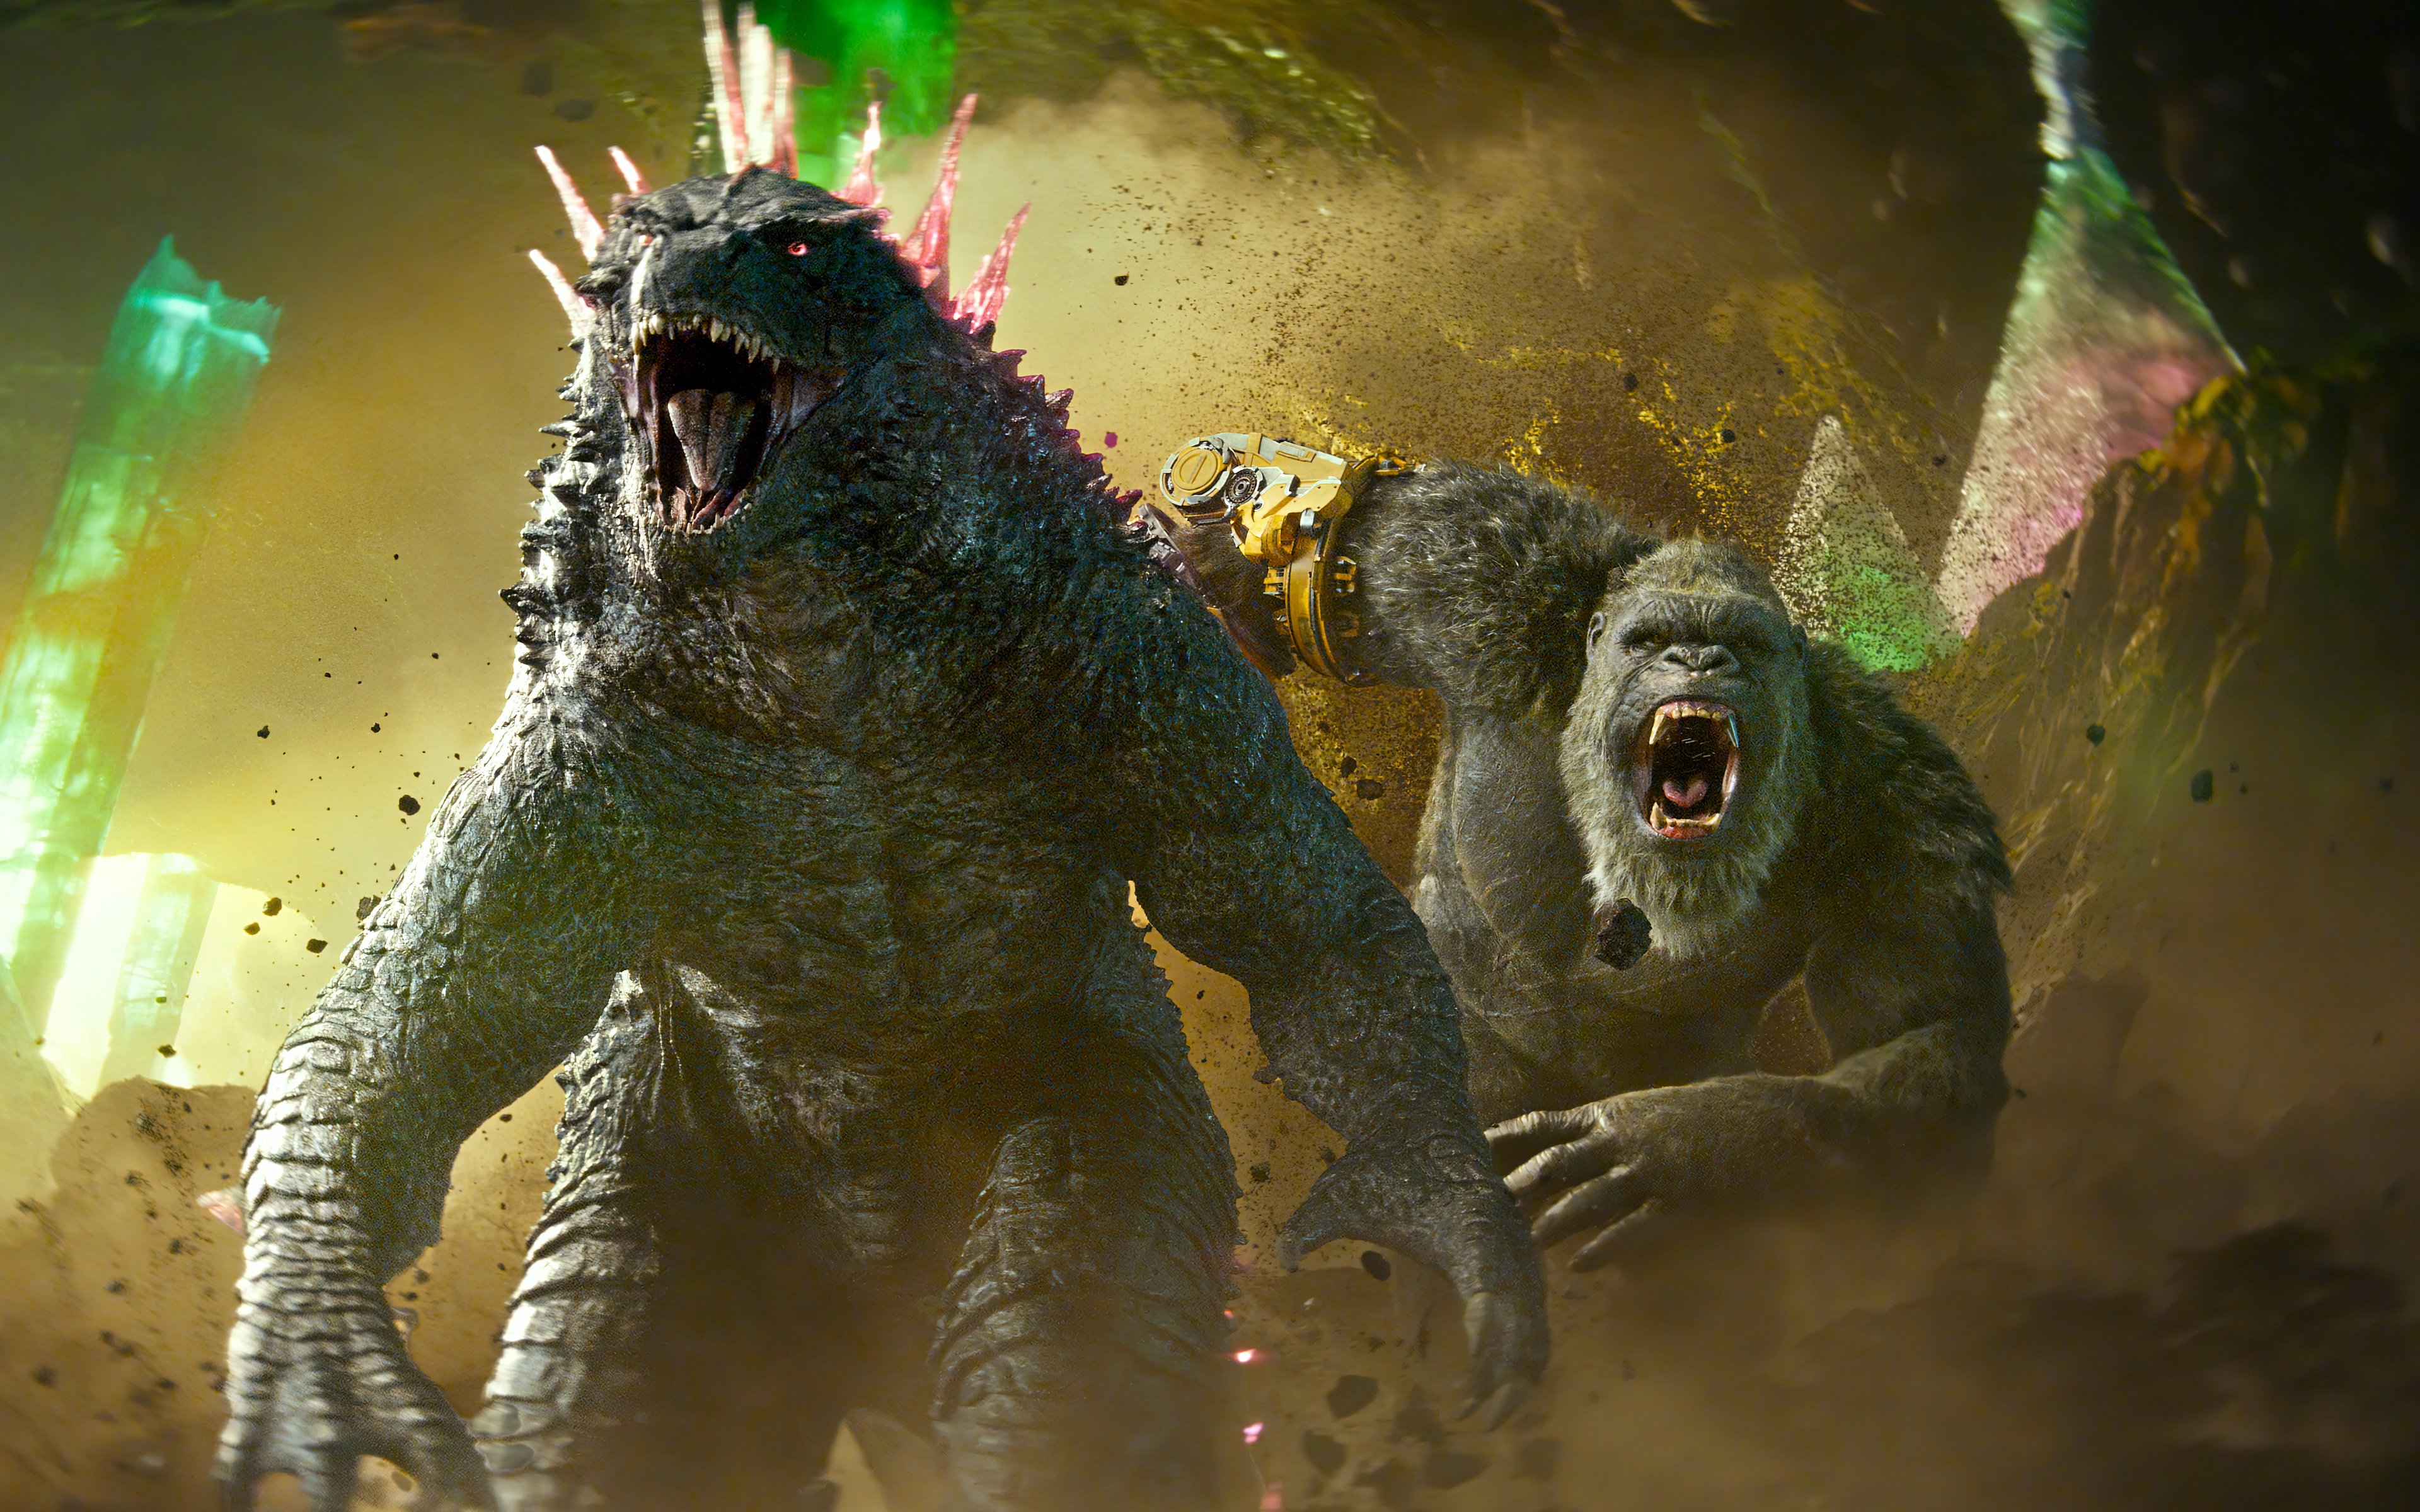 Godzilla x Kong: The New Empire wallpaper Resolution 3840x2400 | Best Download this awesome wallpaper - Cool Wallpaper HD - CoolWallpaper-HD.com